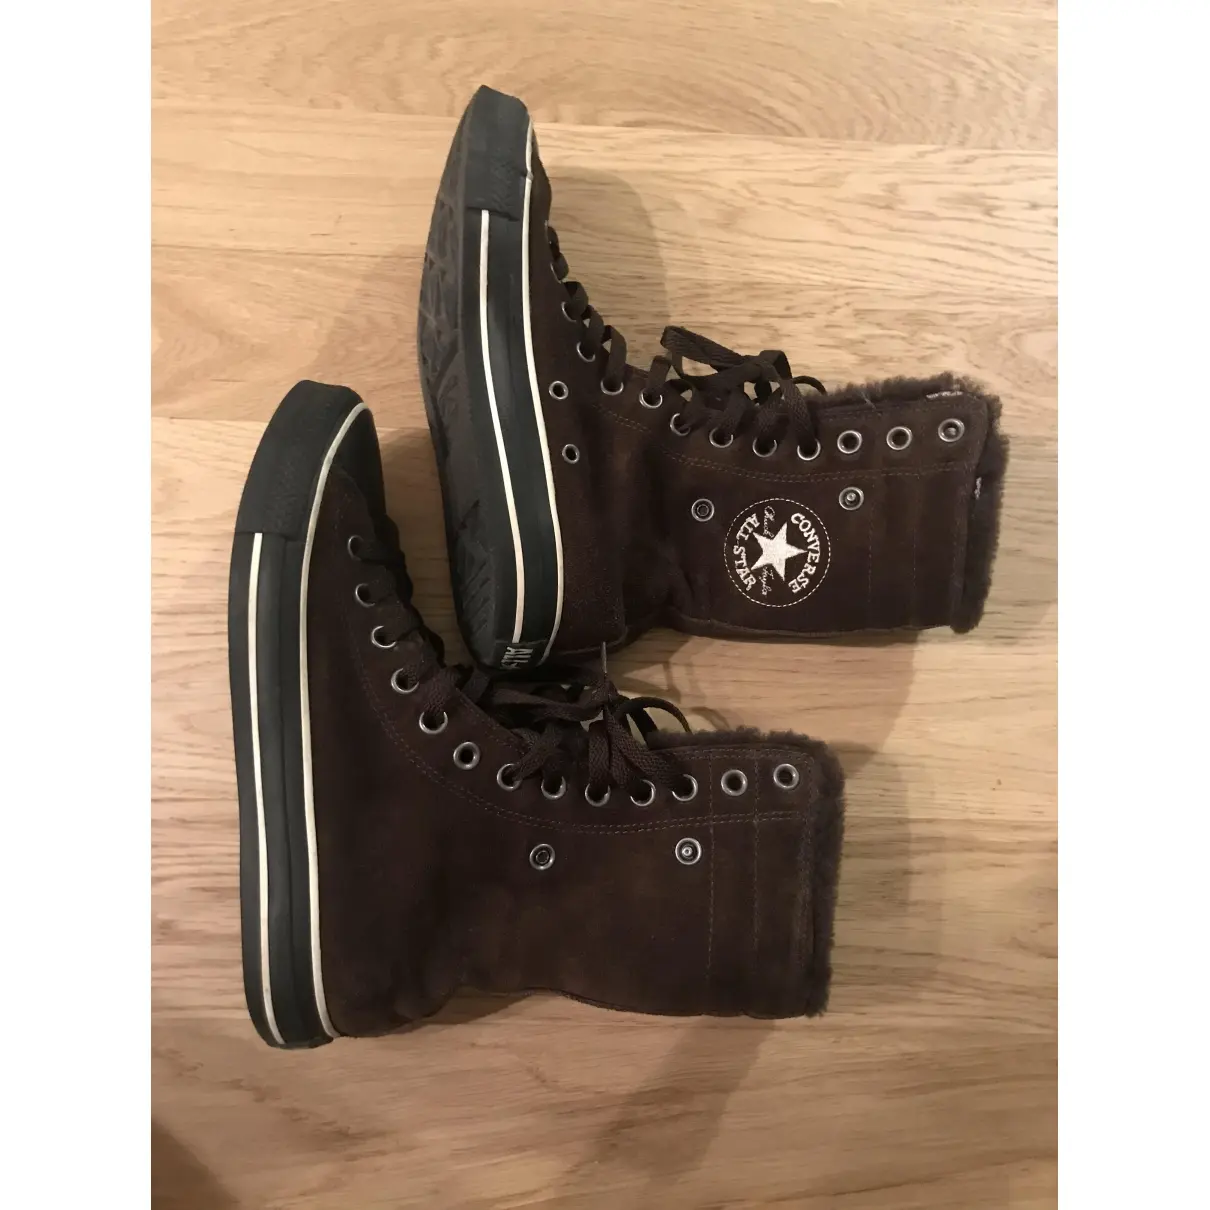 Buy Converse Boots online